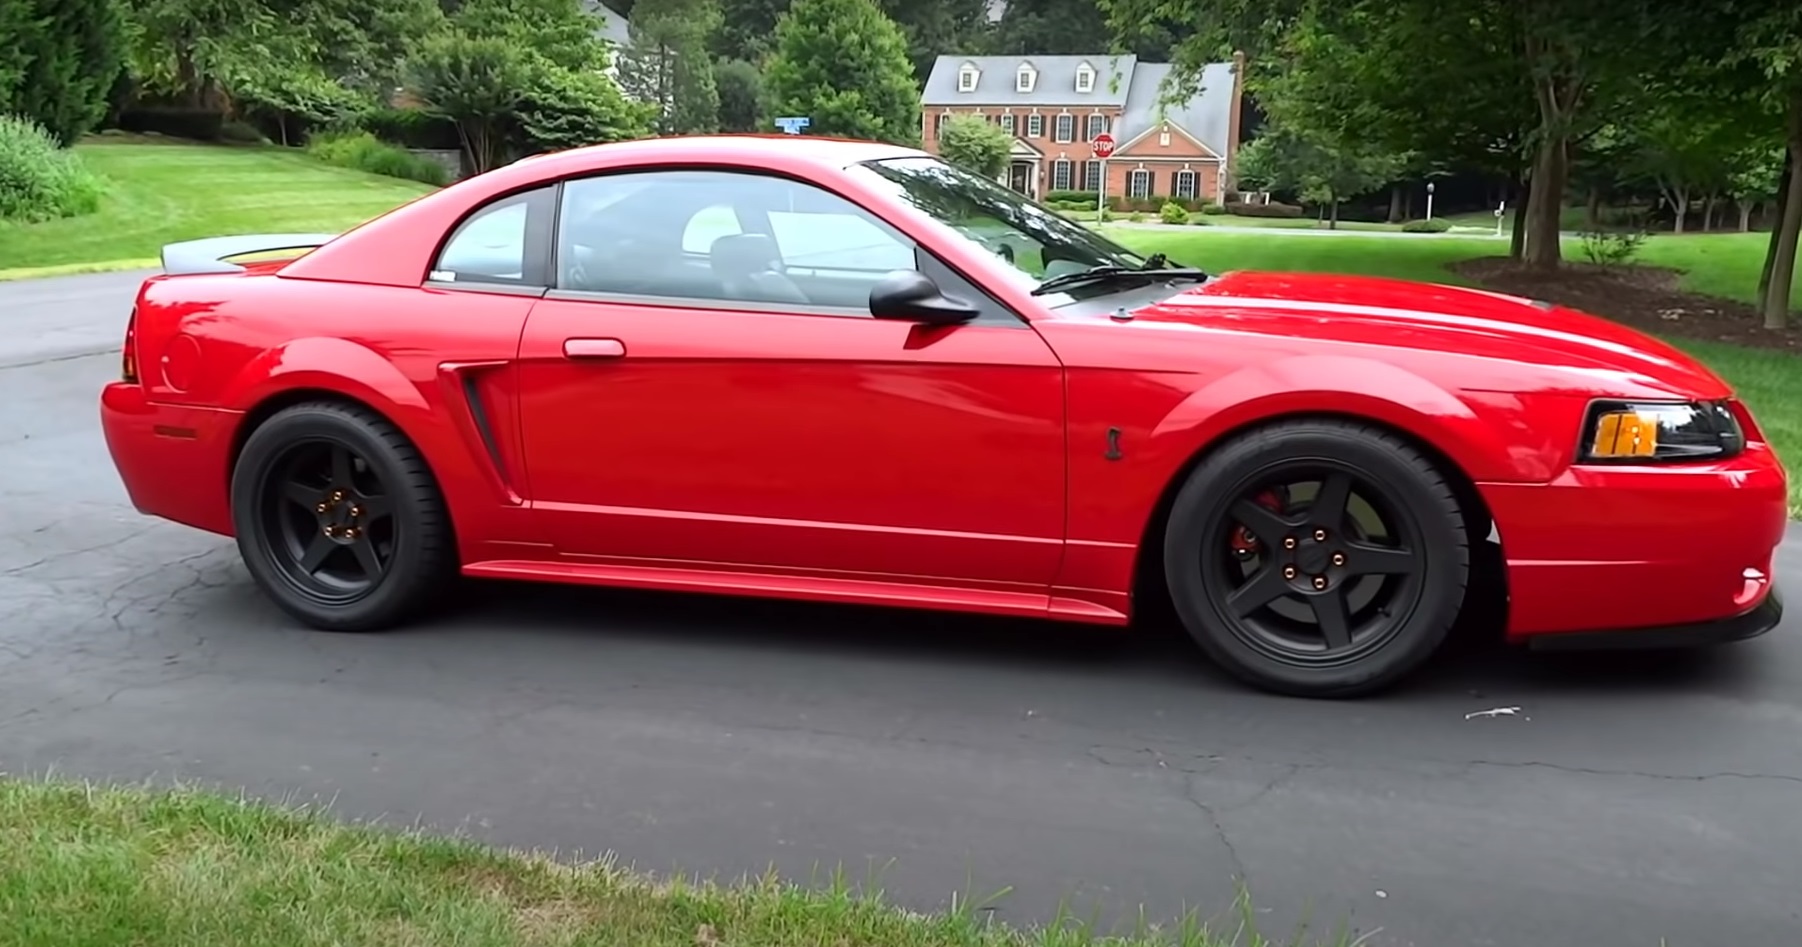 Video: Quick Look At A Very Clean 1999 Ford Mustang SVT Cobra!